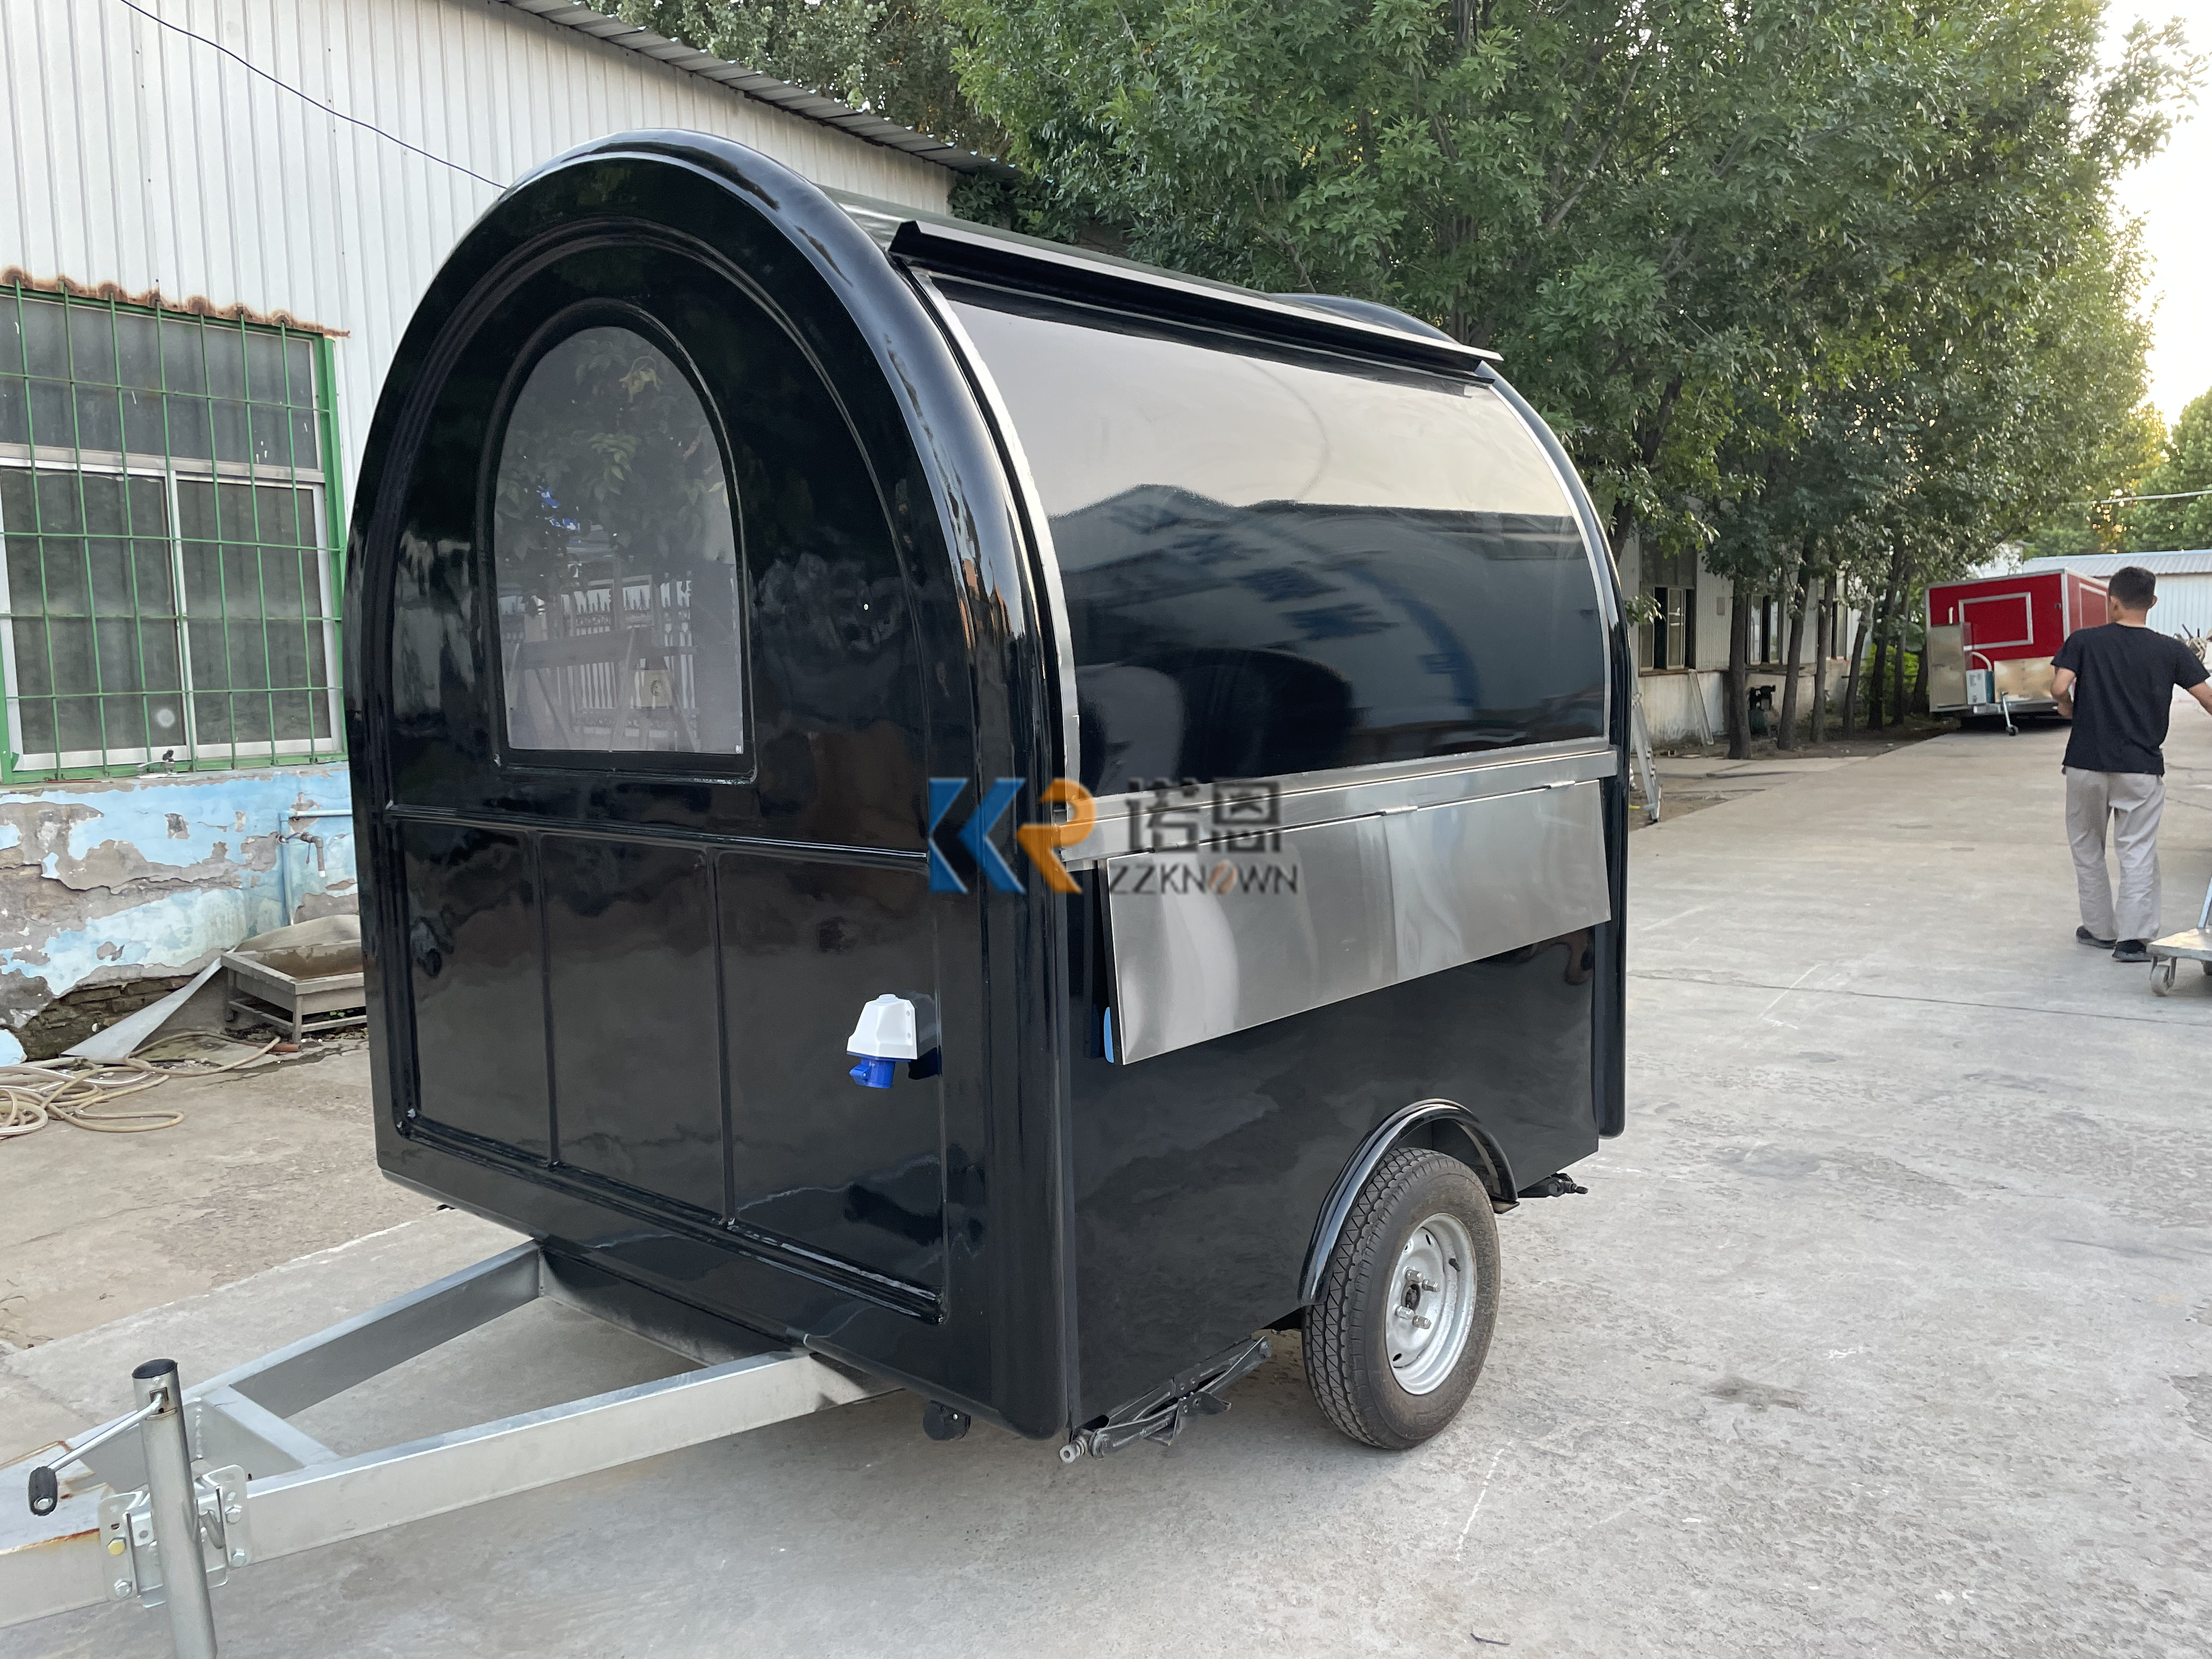 KN-FR-220W Hot Sale Food Trailers Coffee Trailers Fully Equipped Food Truck Trailers